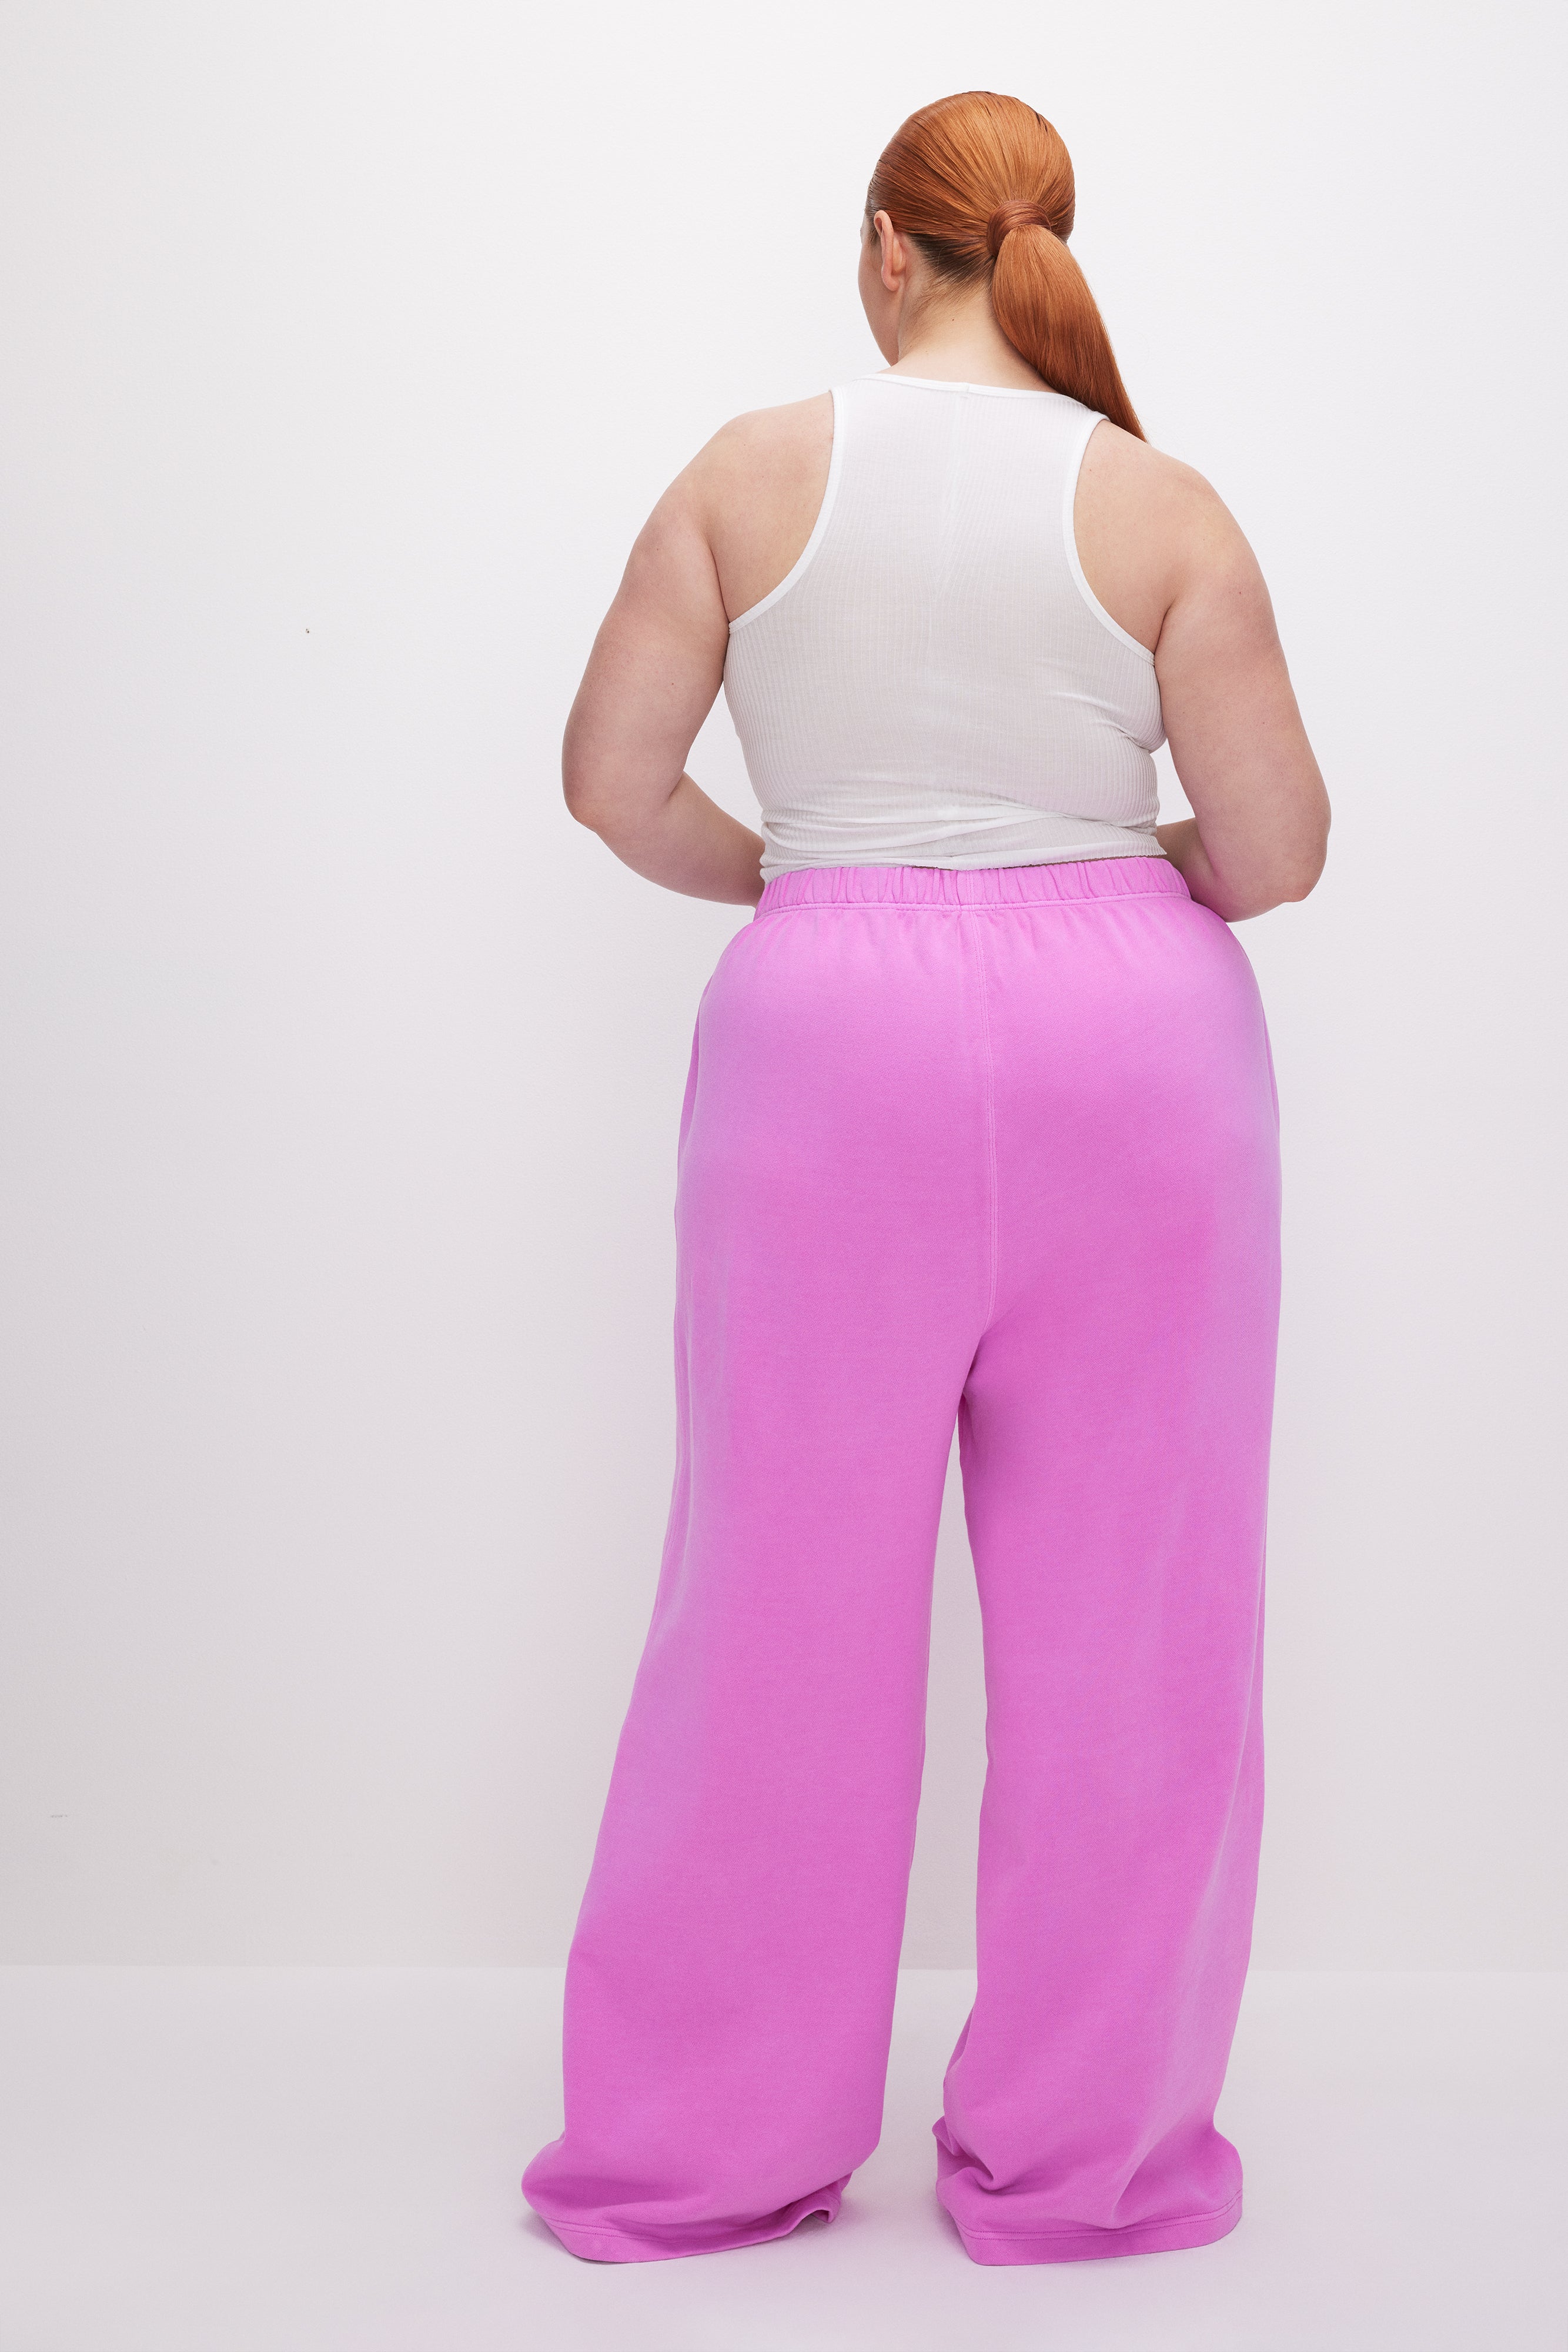 Prettylittlething Light Pink High Waisted Sweatpants